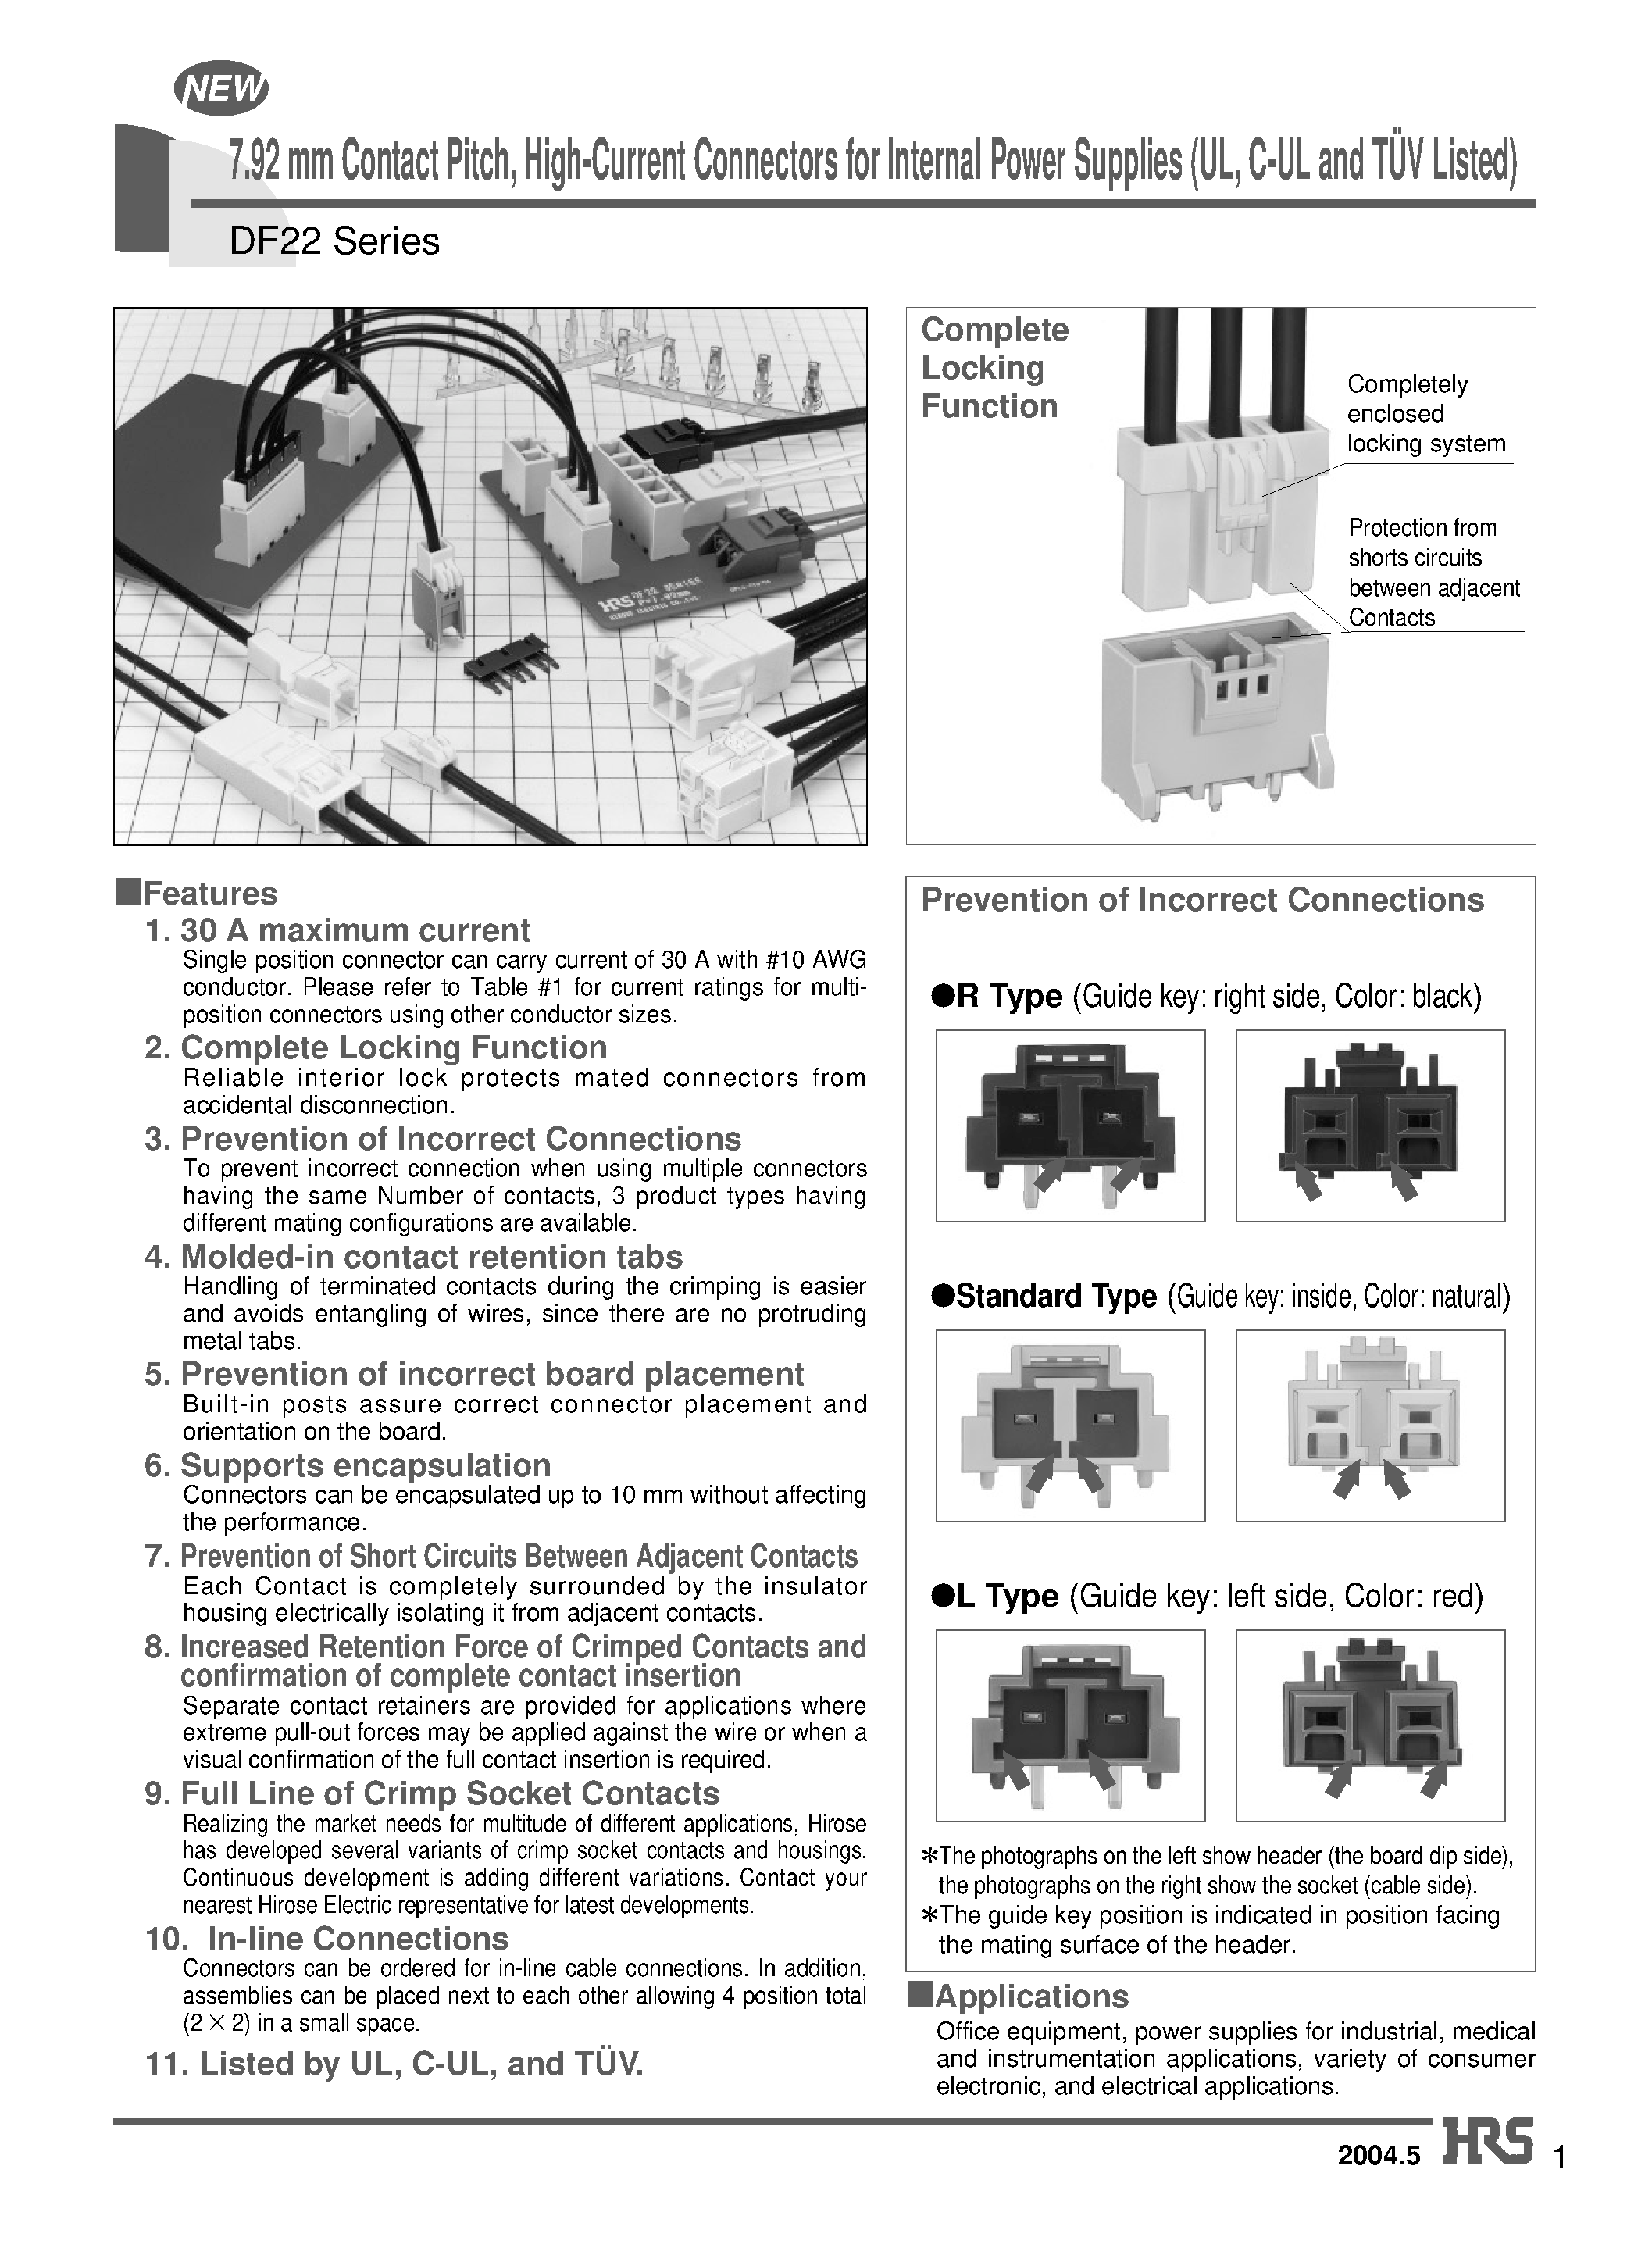 Даташит DF22C-1P-7.92DSA - 7.92 mm Contact Pitch/ High-Current Connectors for Internal Power Supplies (UL/ C-UL and TUV Listed) страница 1